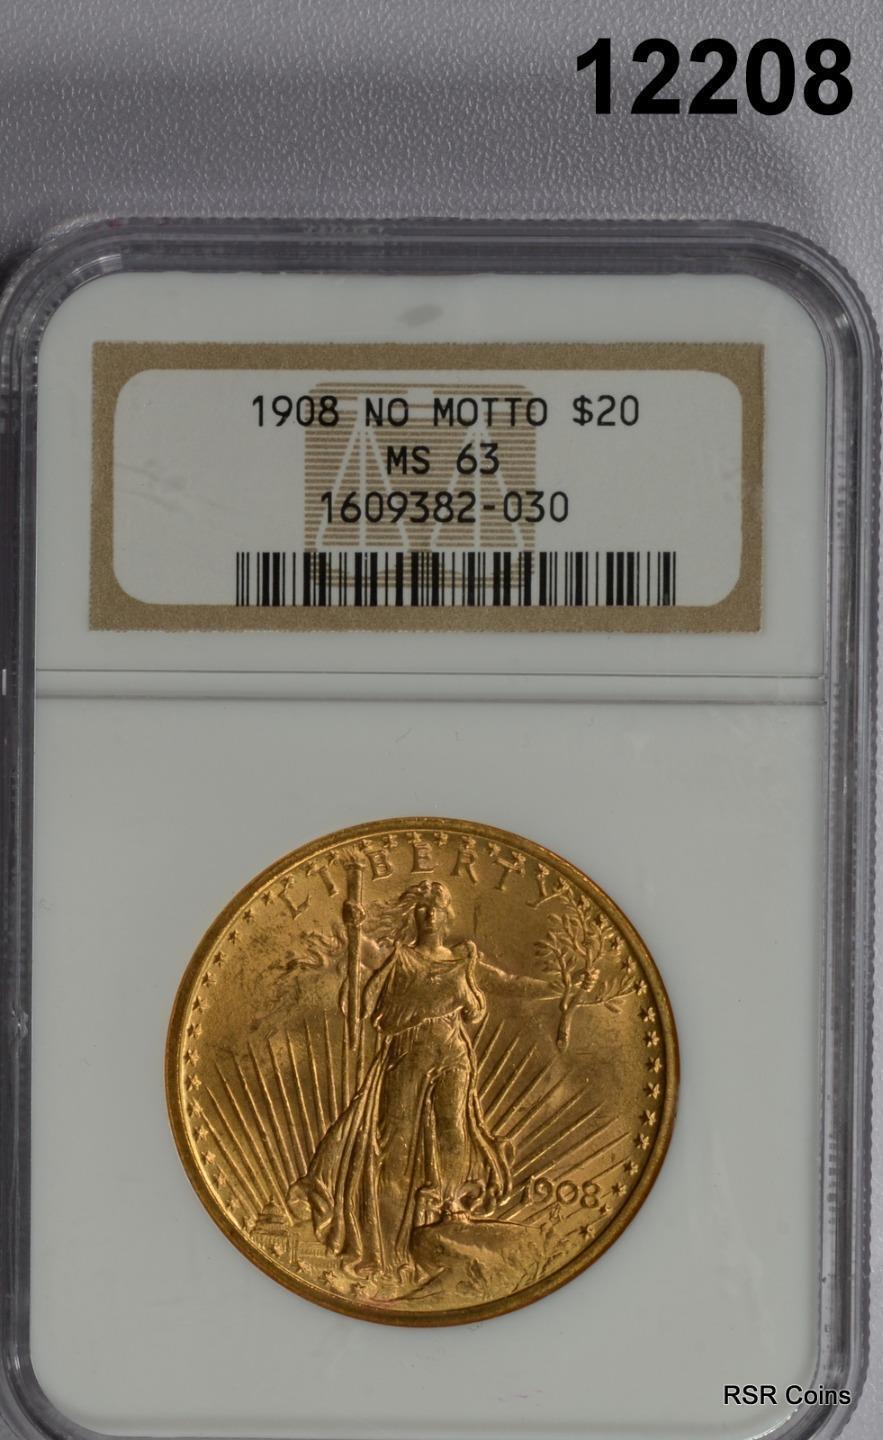 1908 NO MOTTO $20 ST GAUDENS GOLD DOUBLE EAGLE NGC CERTIFIED MS63! #12208